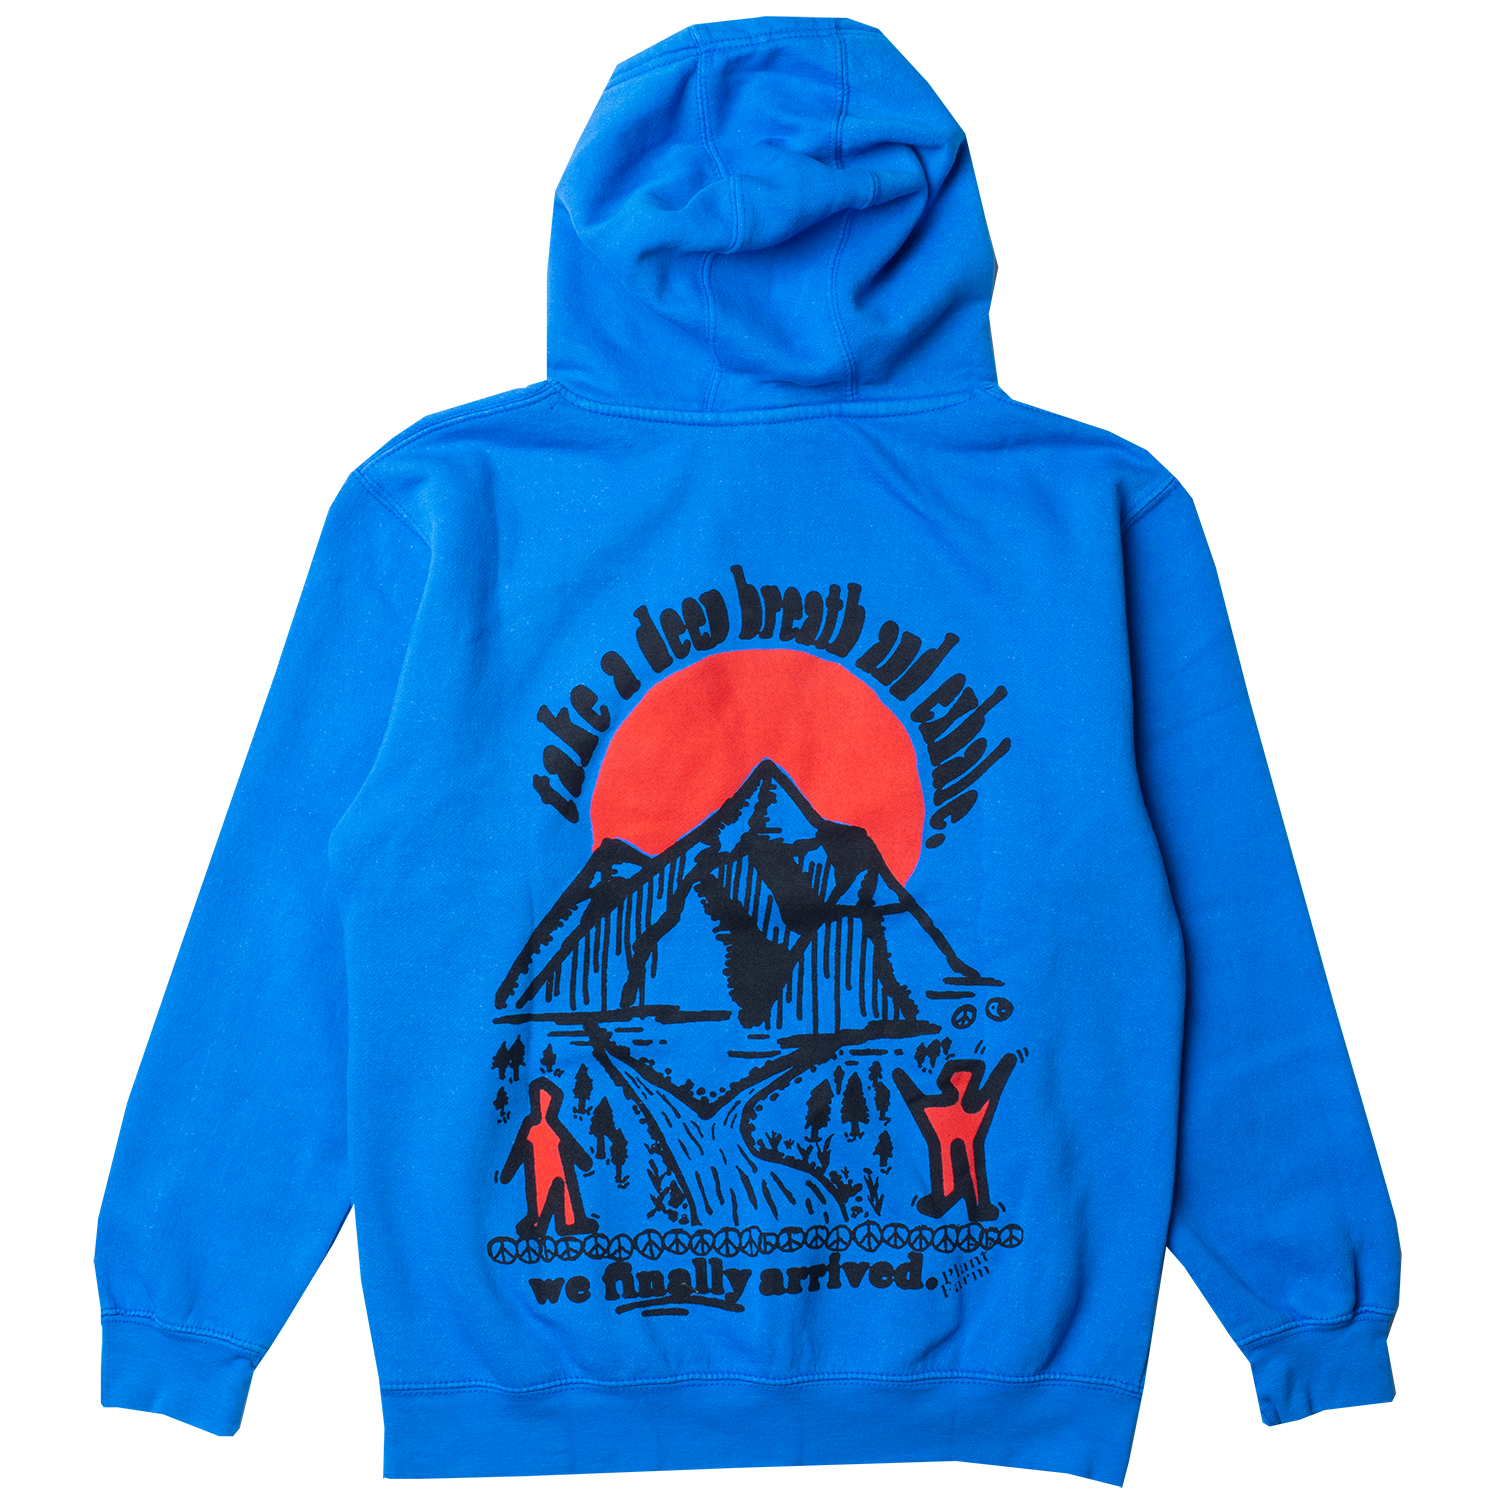 Heith Haring inspired front graphic screen printed with puffy ink on blue hoodie